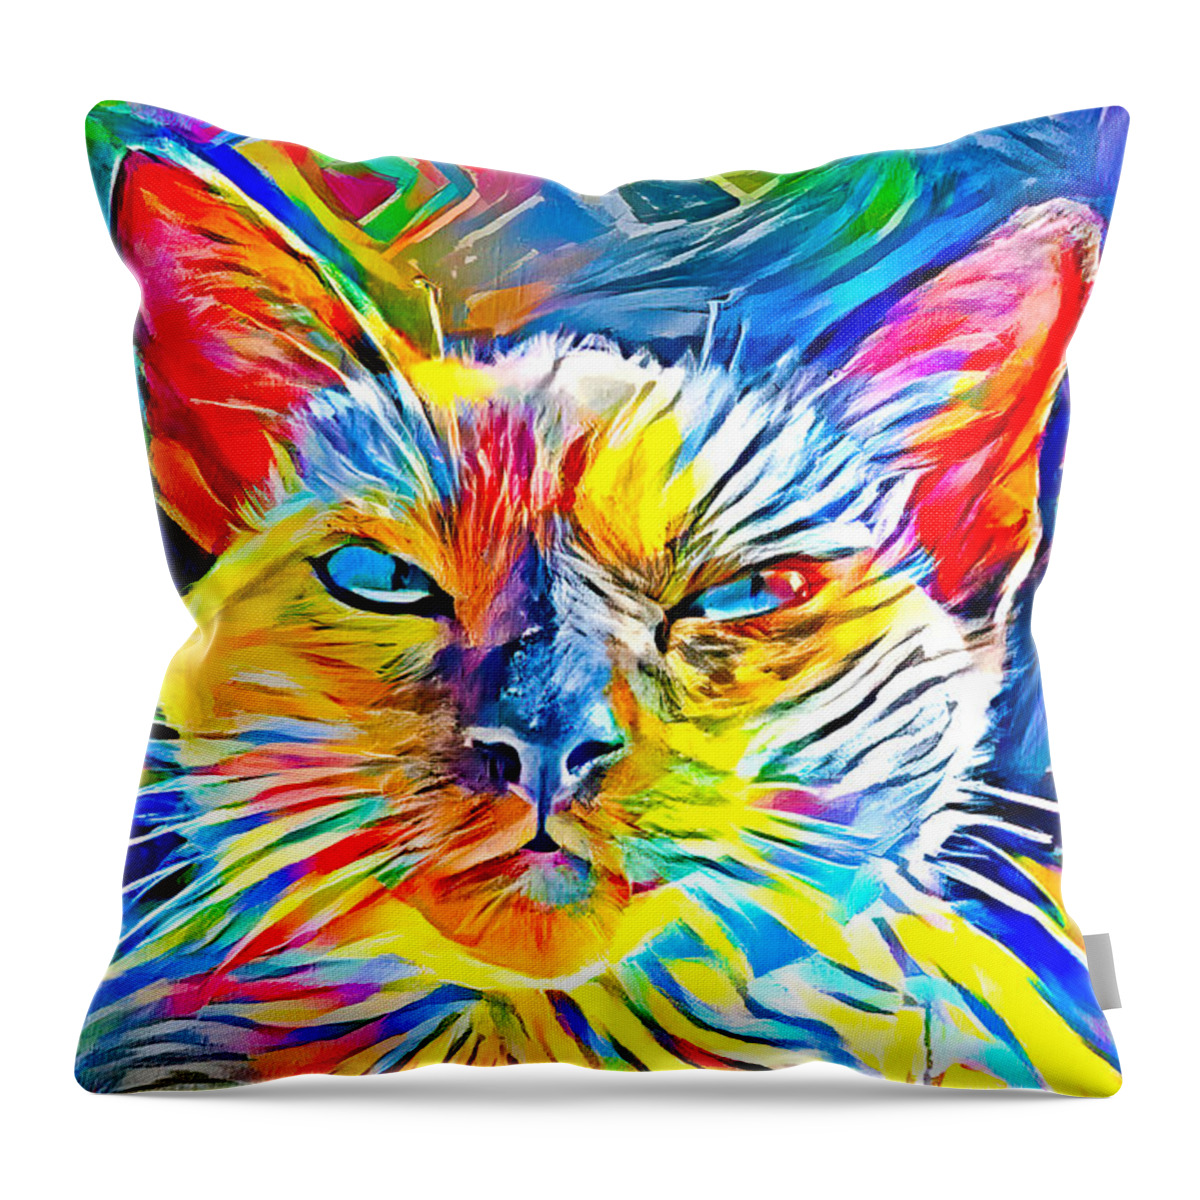 Siamese Cat Throw Pillow featuring the digital art Siamese cat face in the sun - colorful zebra pattern painting by Nicko Prints